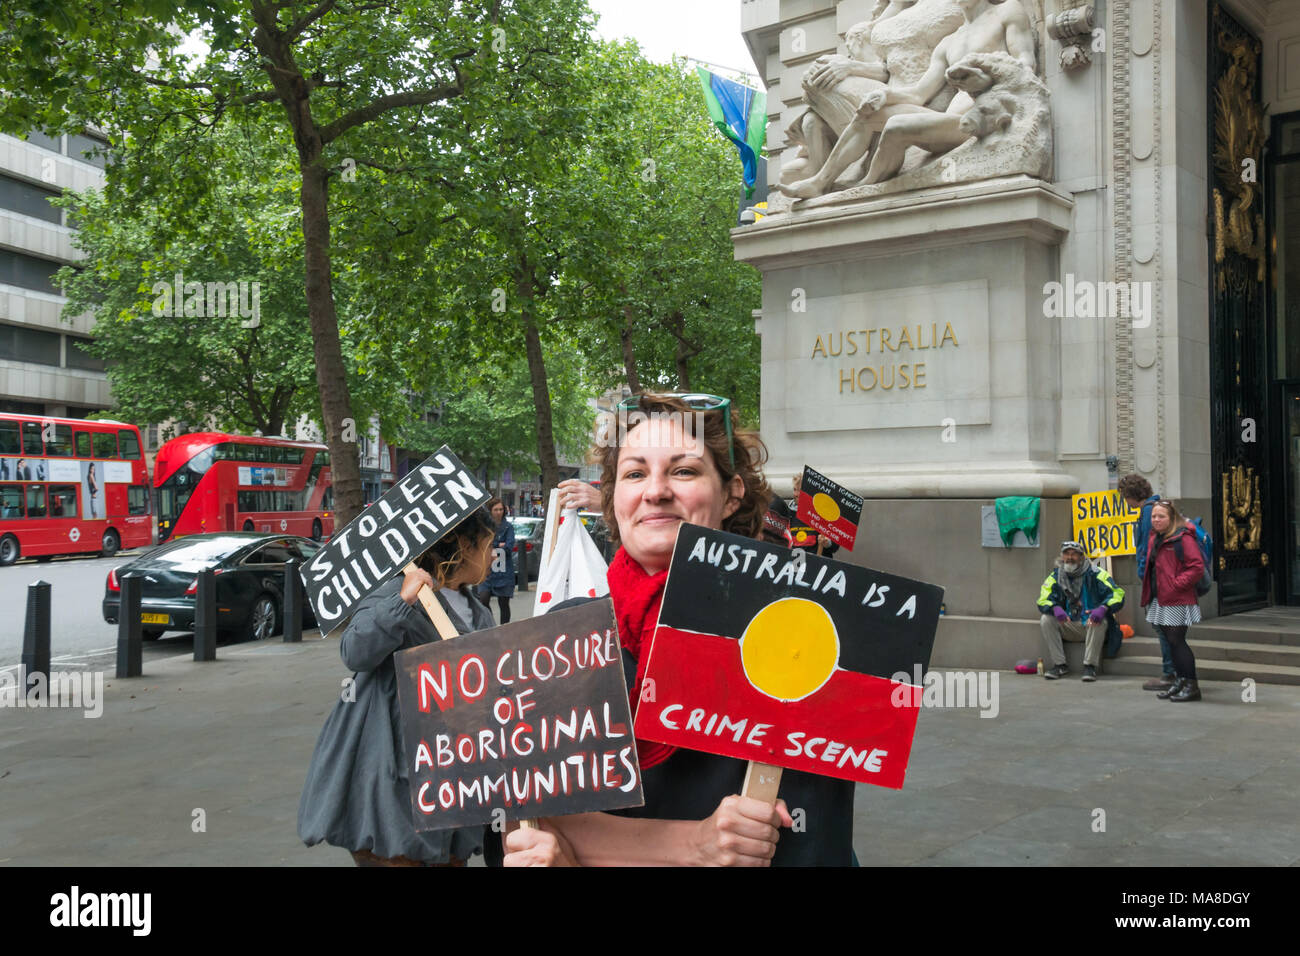 'Australia is a Crimes Scene 'states a placard in the design of the Aborigine flag, and the protester holds a second 'No Closure of Aboriginal Communities at the protest at Australia House, London. Stock Photo